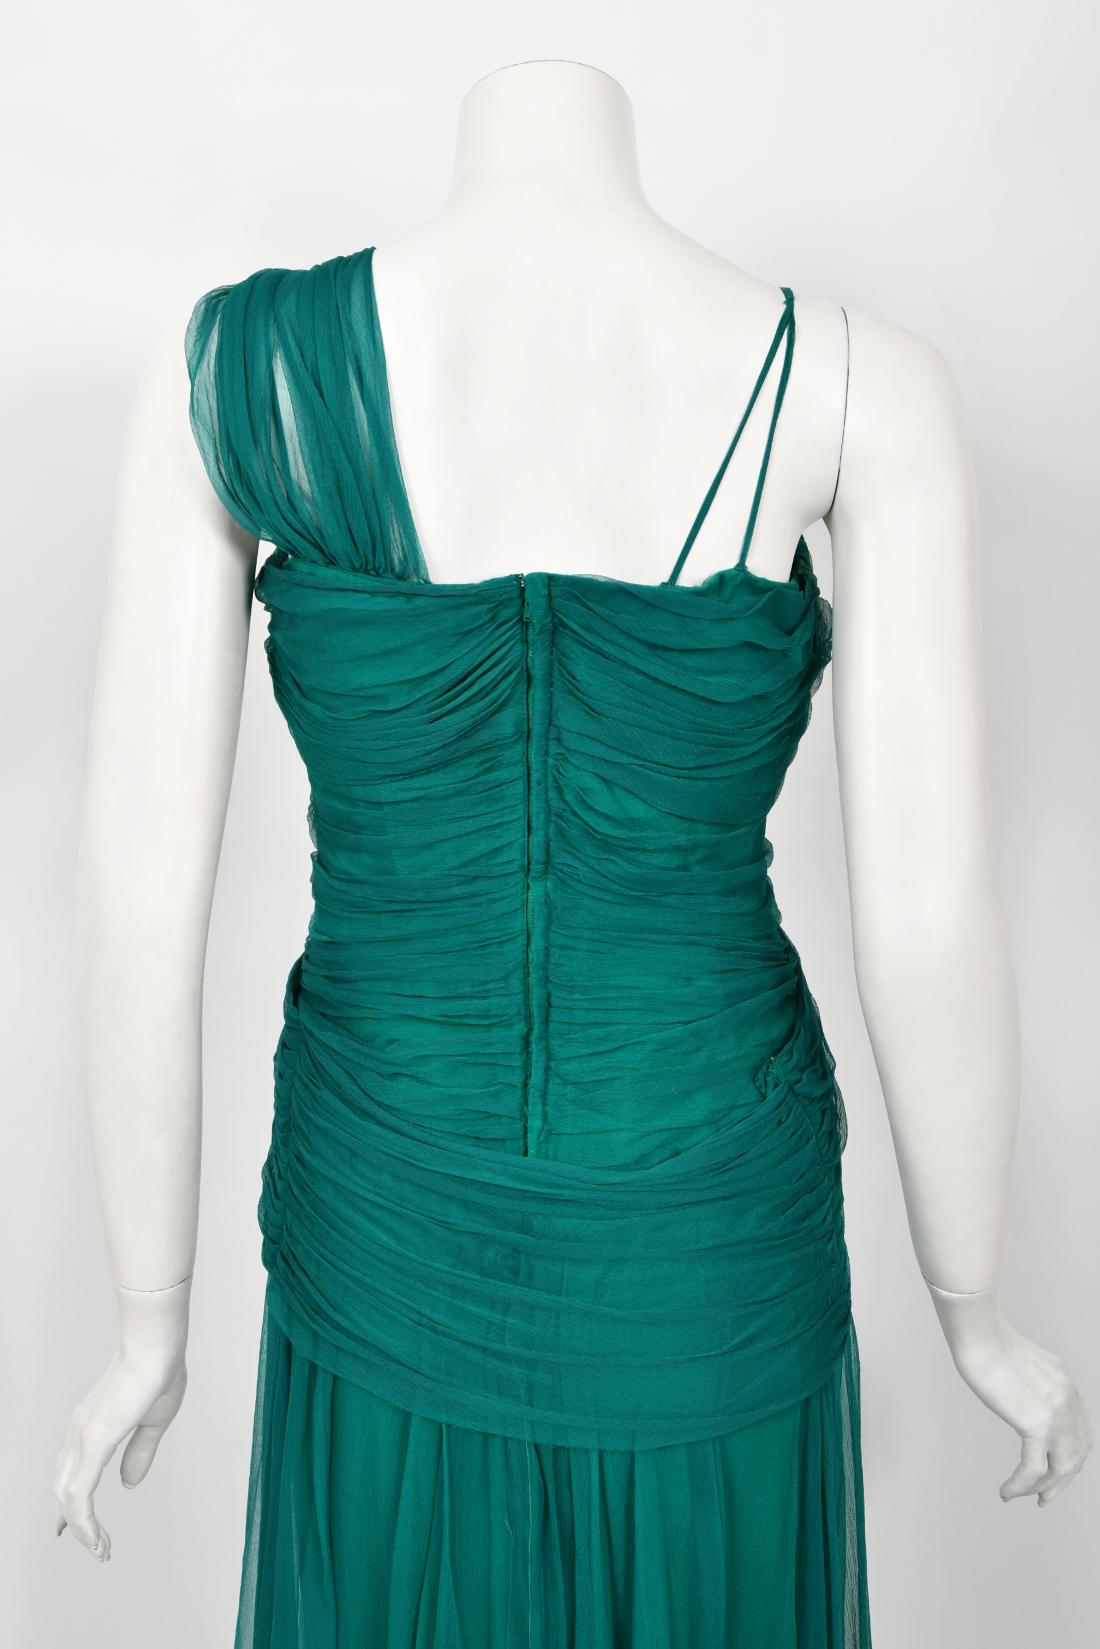 Vintage 1950's Irene Lentz Couture Teal Green Draped Silk Grecian Goddess Gown For Sale 10